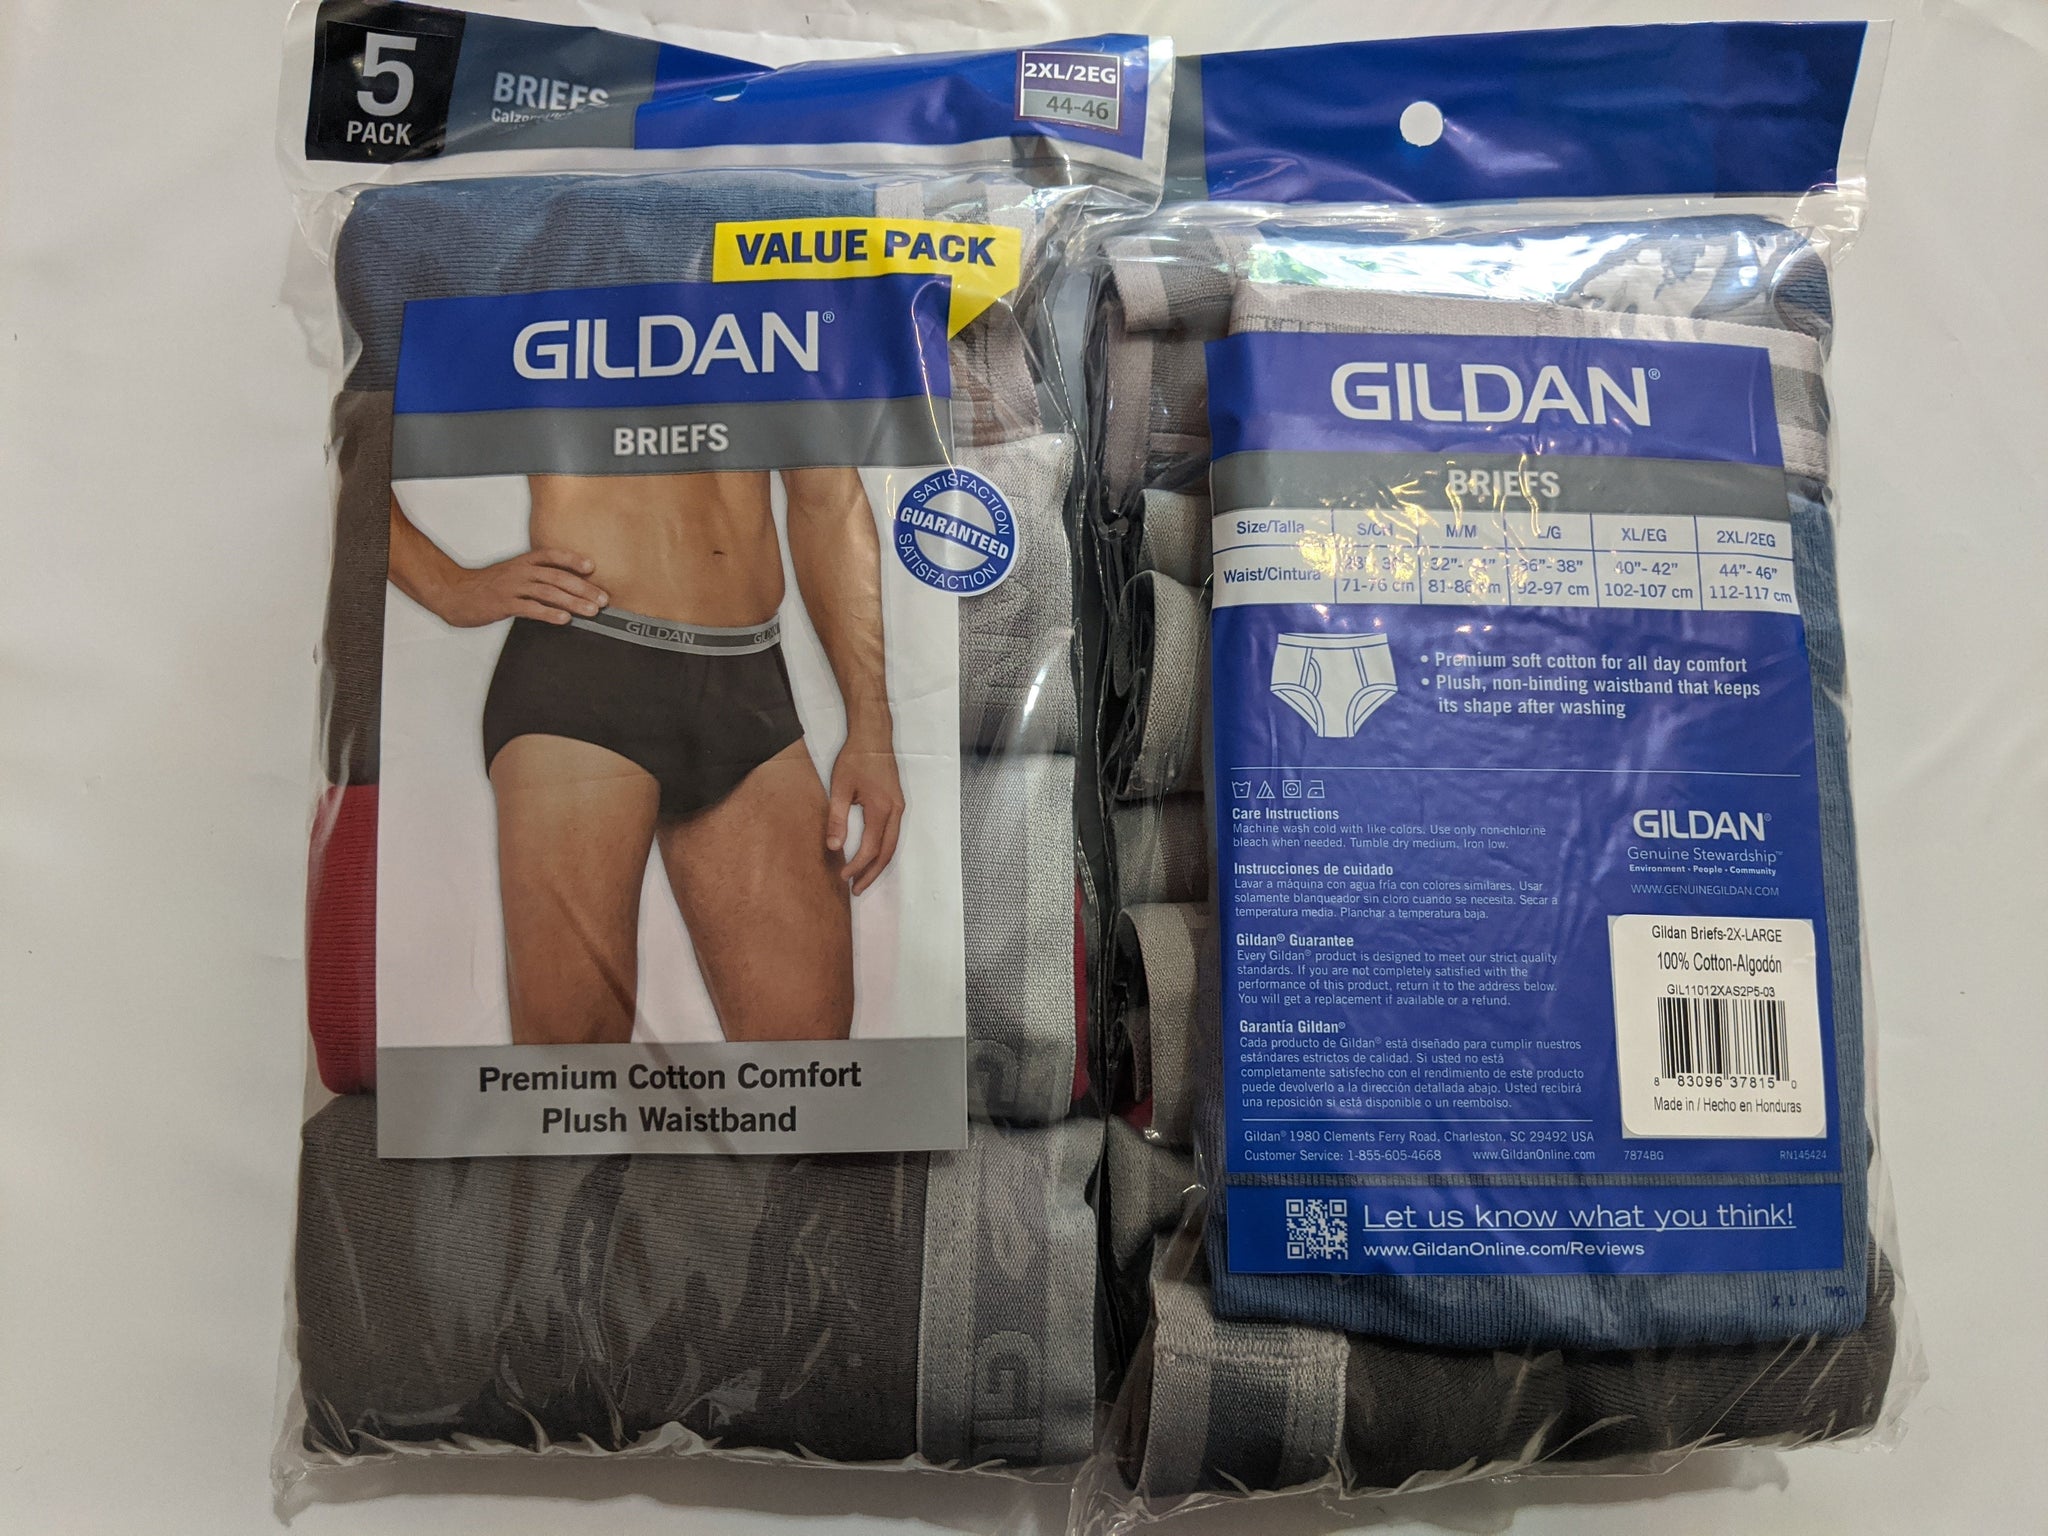 Dollarama] Gildan boxer briefs 6 pack for $4 - Page 2